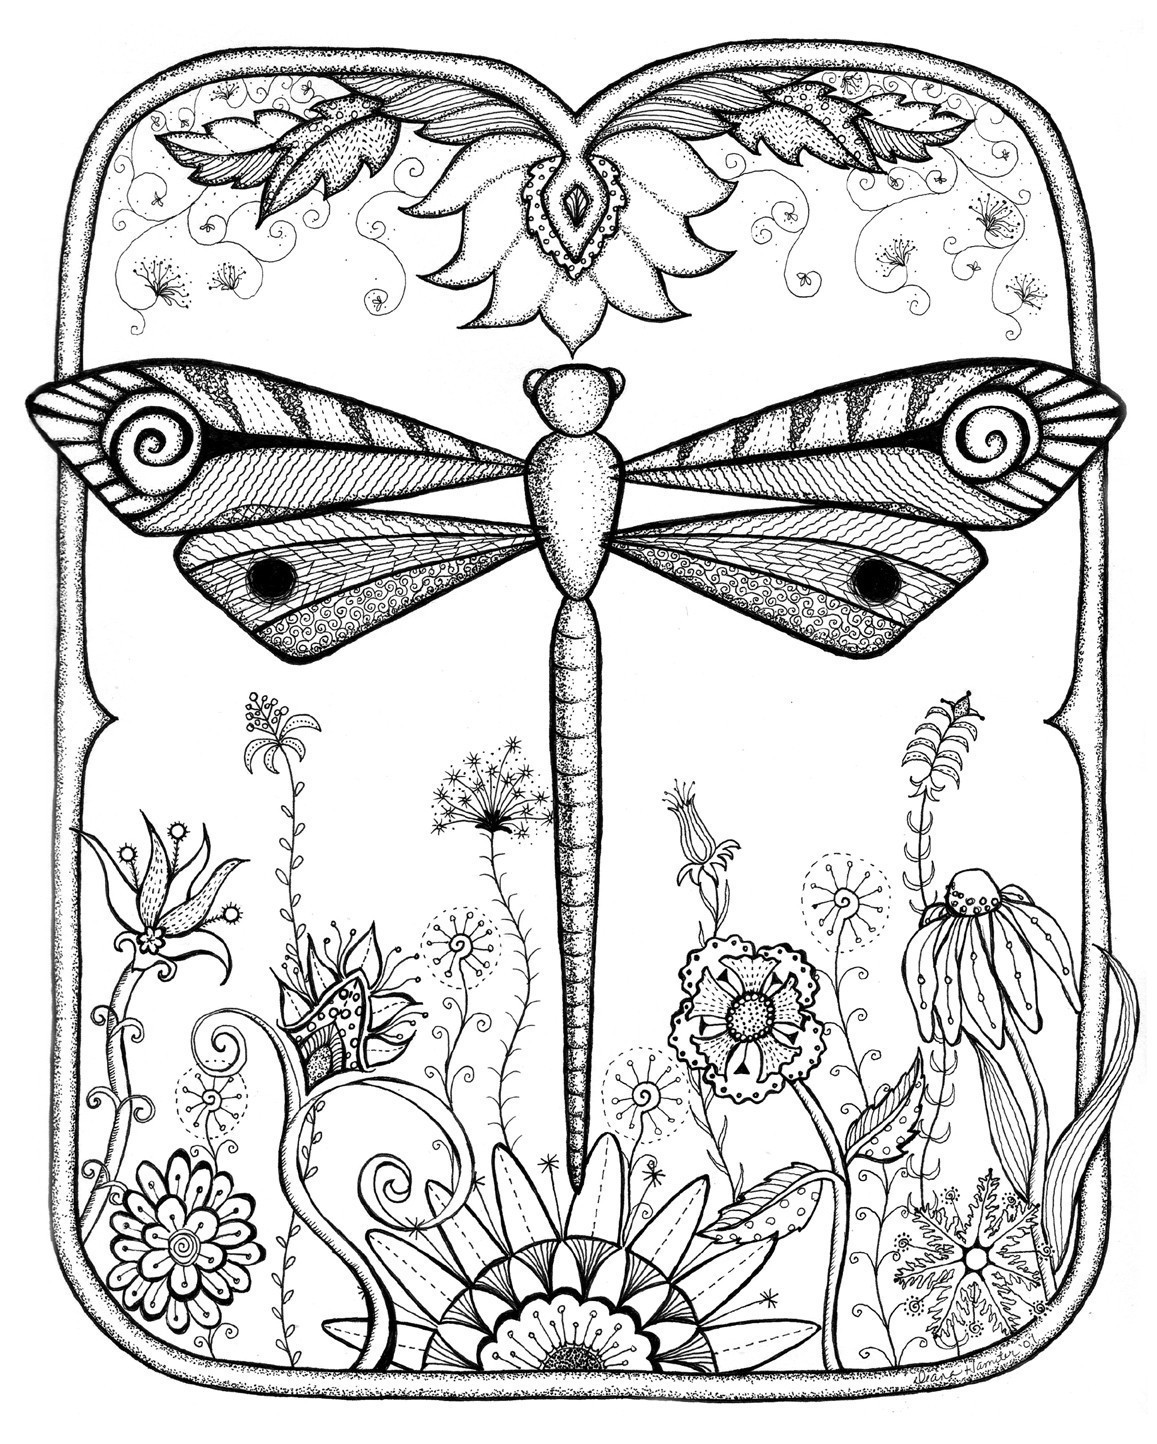 Dragonfly Adult Coloring Pages To Print Coloring Pages